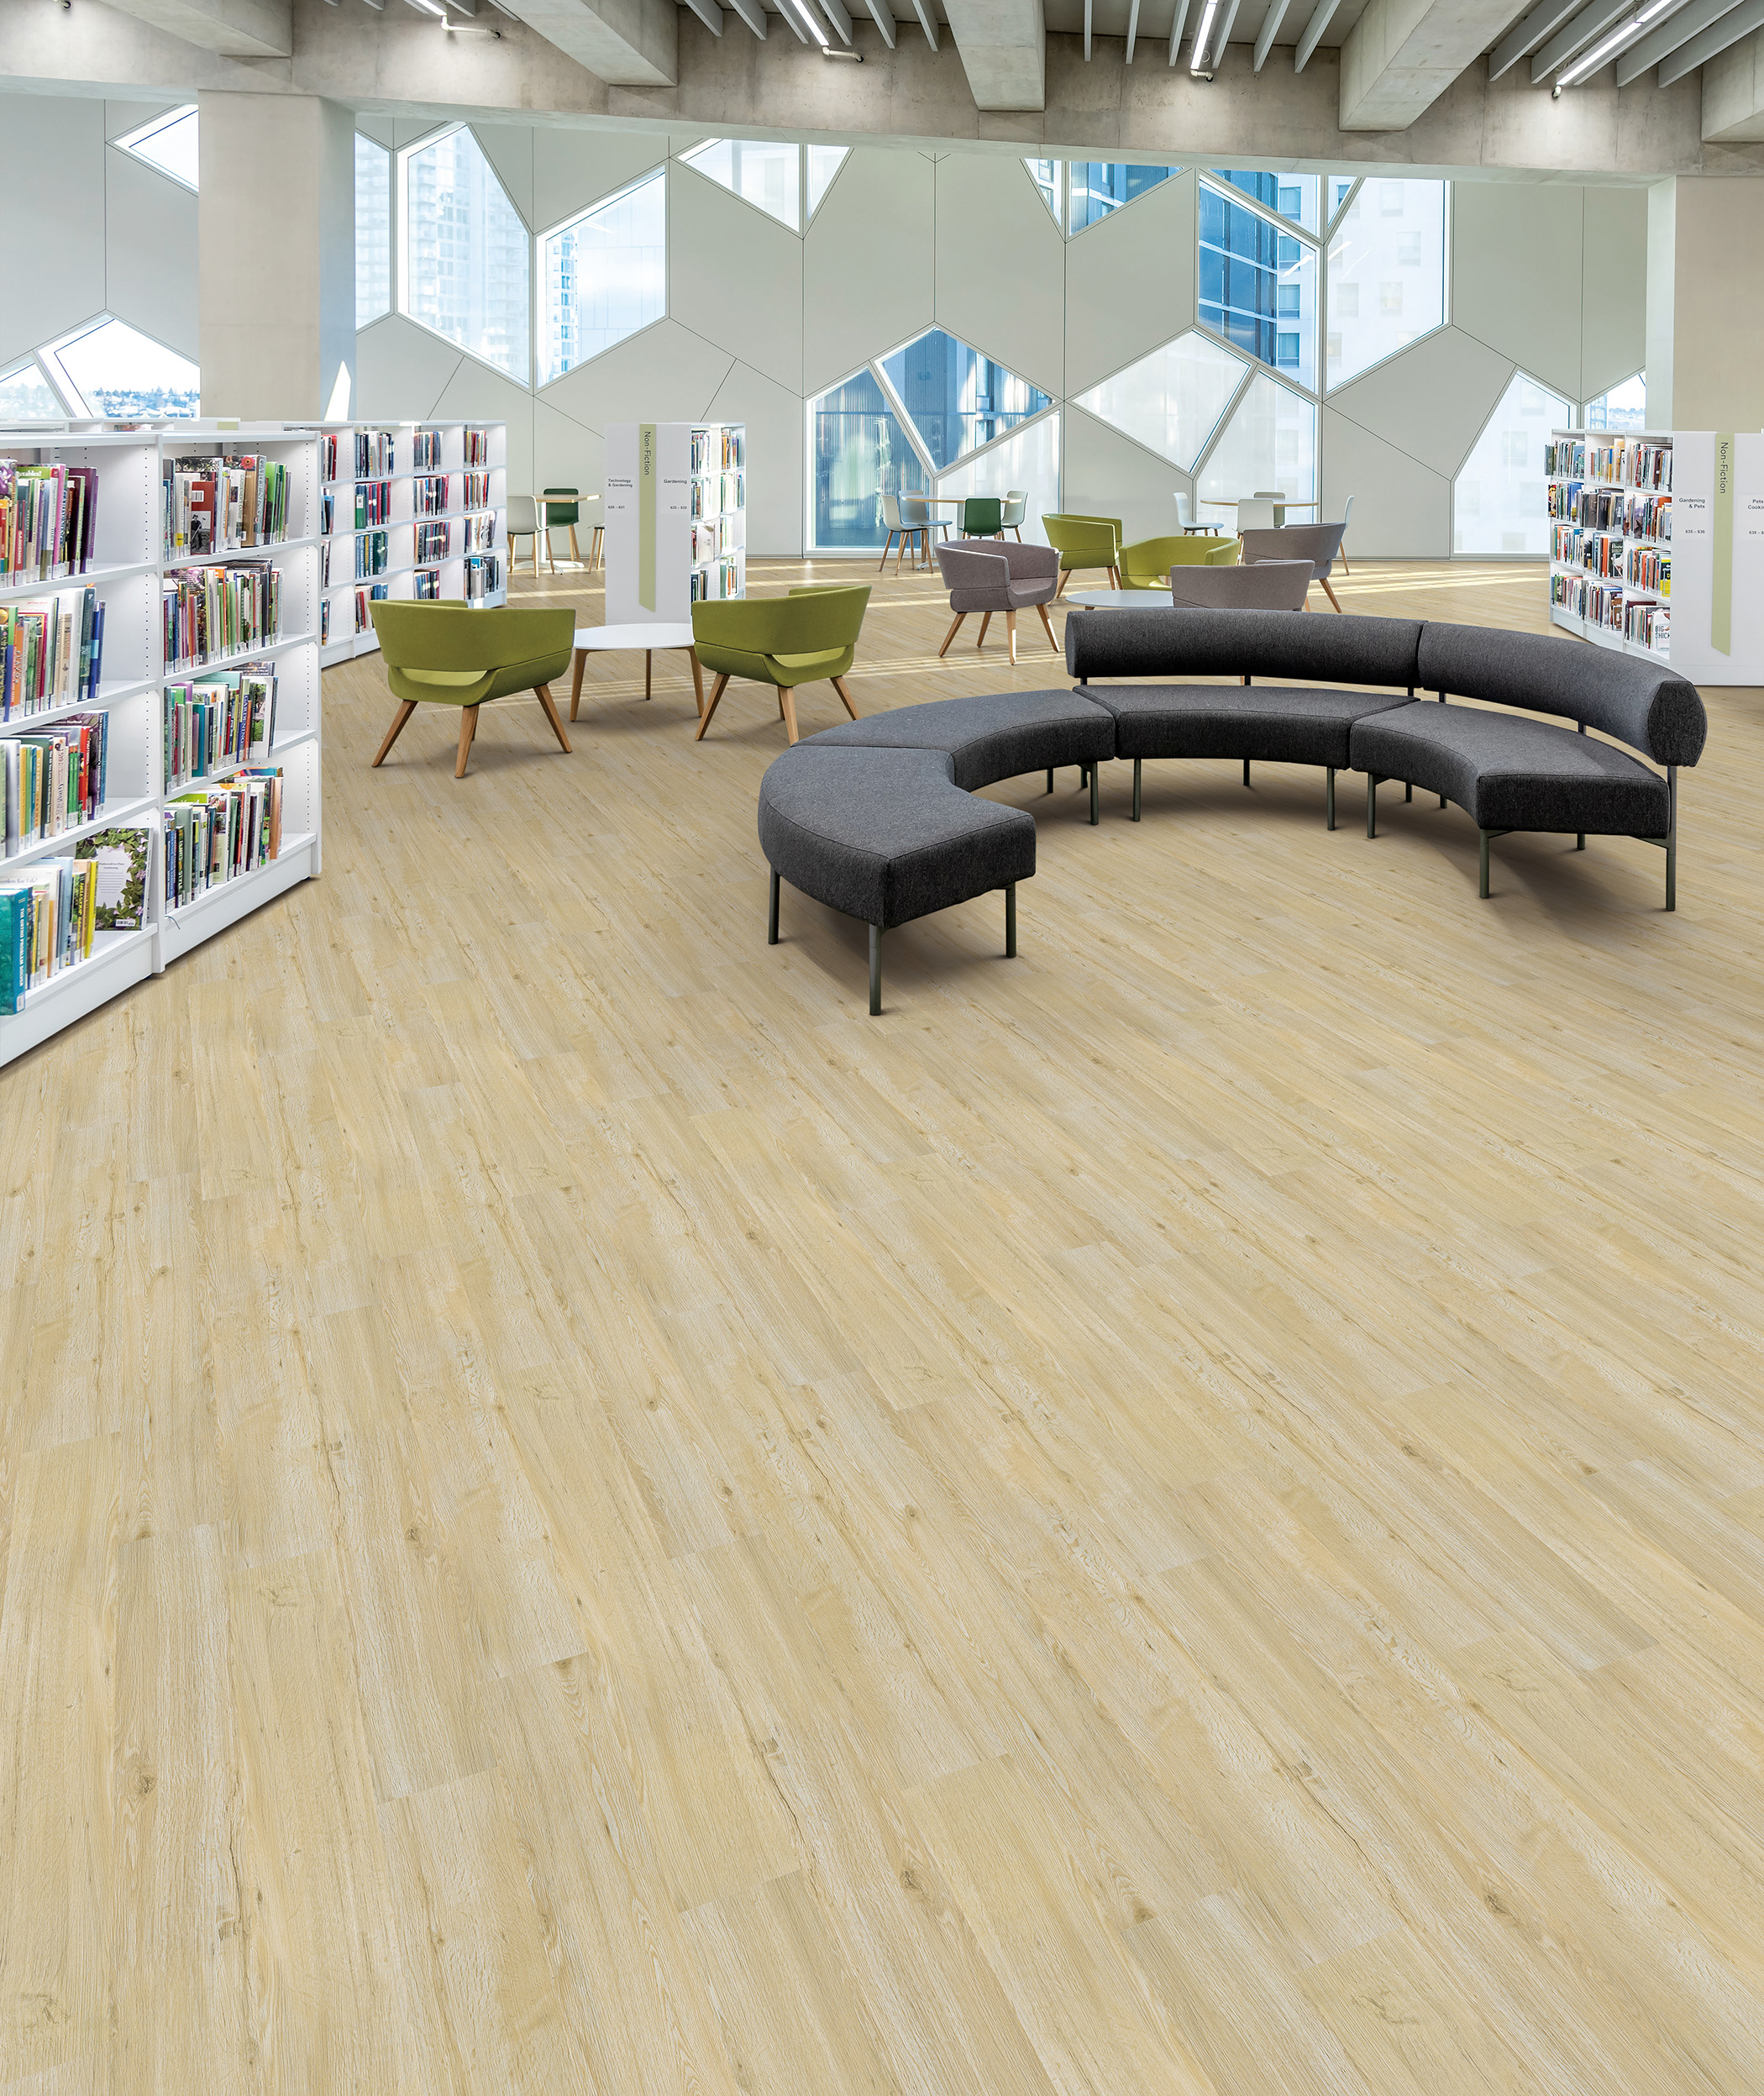 Miracle Collection Falcon Oak 7.25 X 48 by Trends - Quad Cities -  Floorcrafters